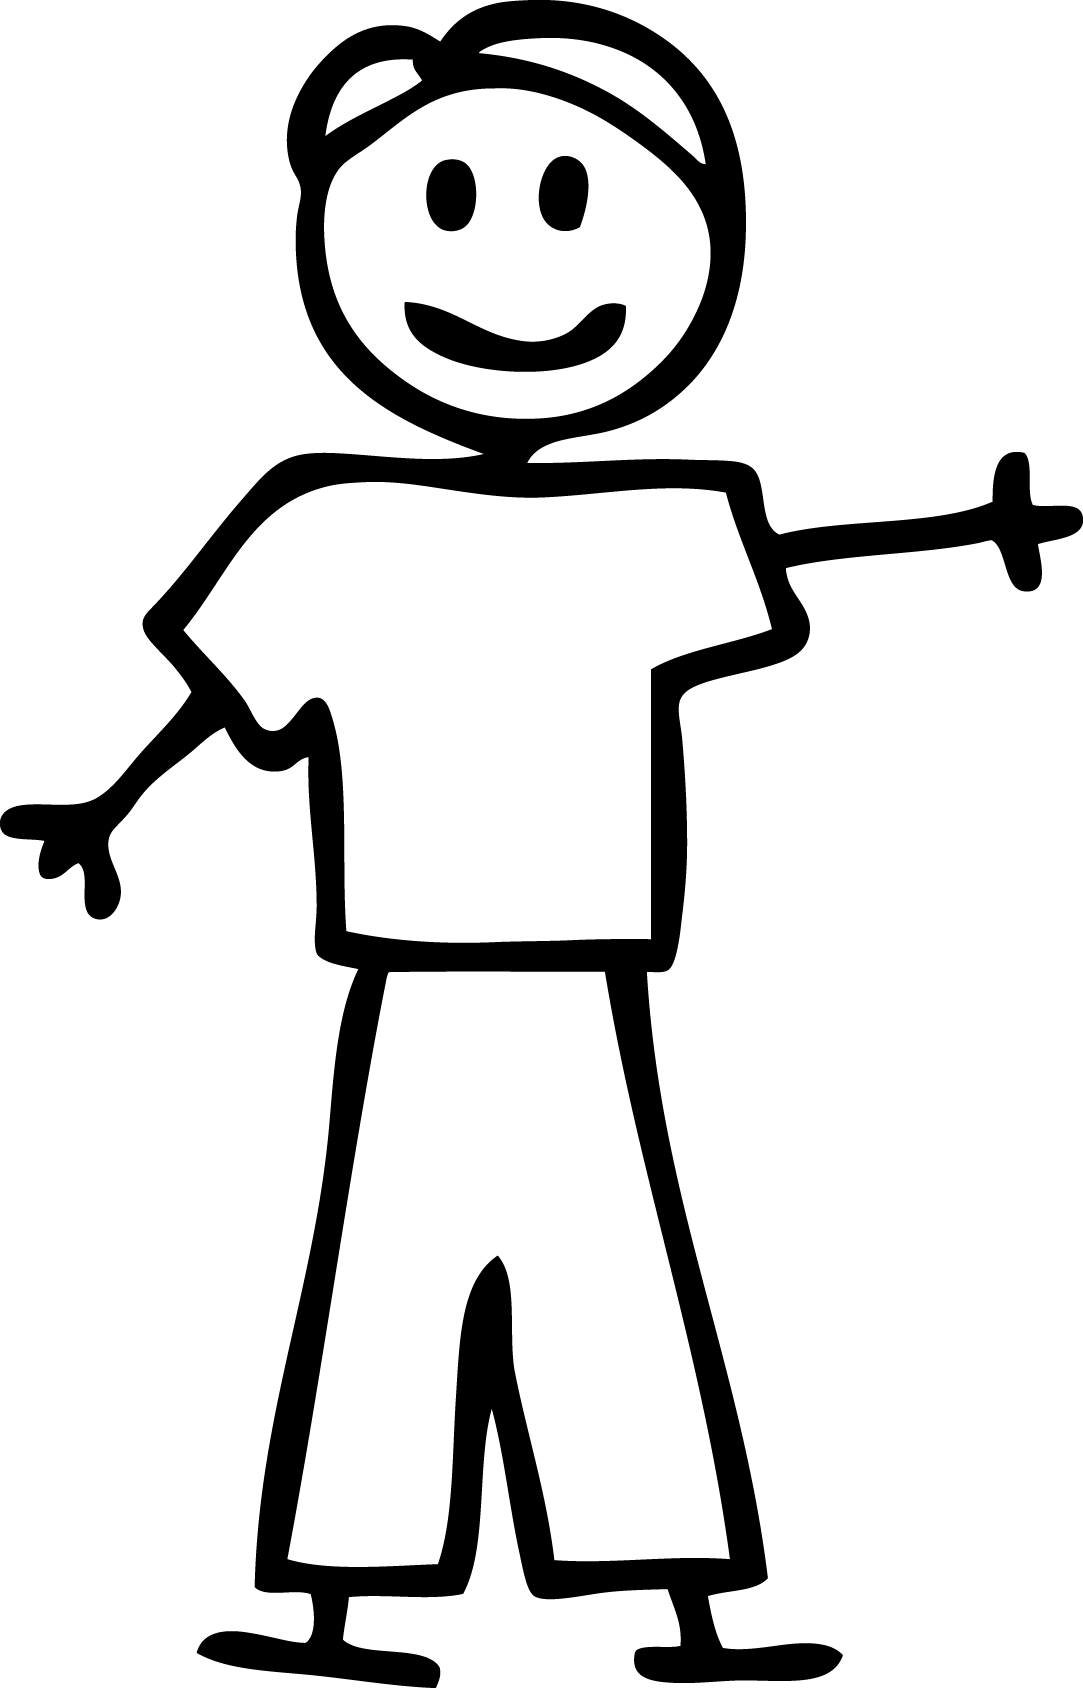 Free Stick People, Download Free Stick People png images, Free ClipArts